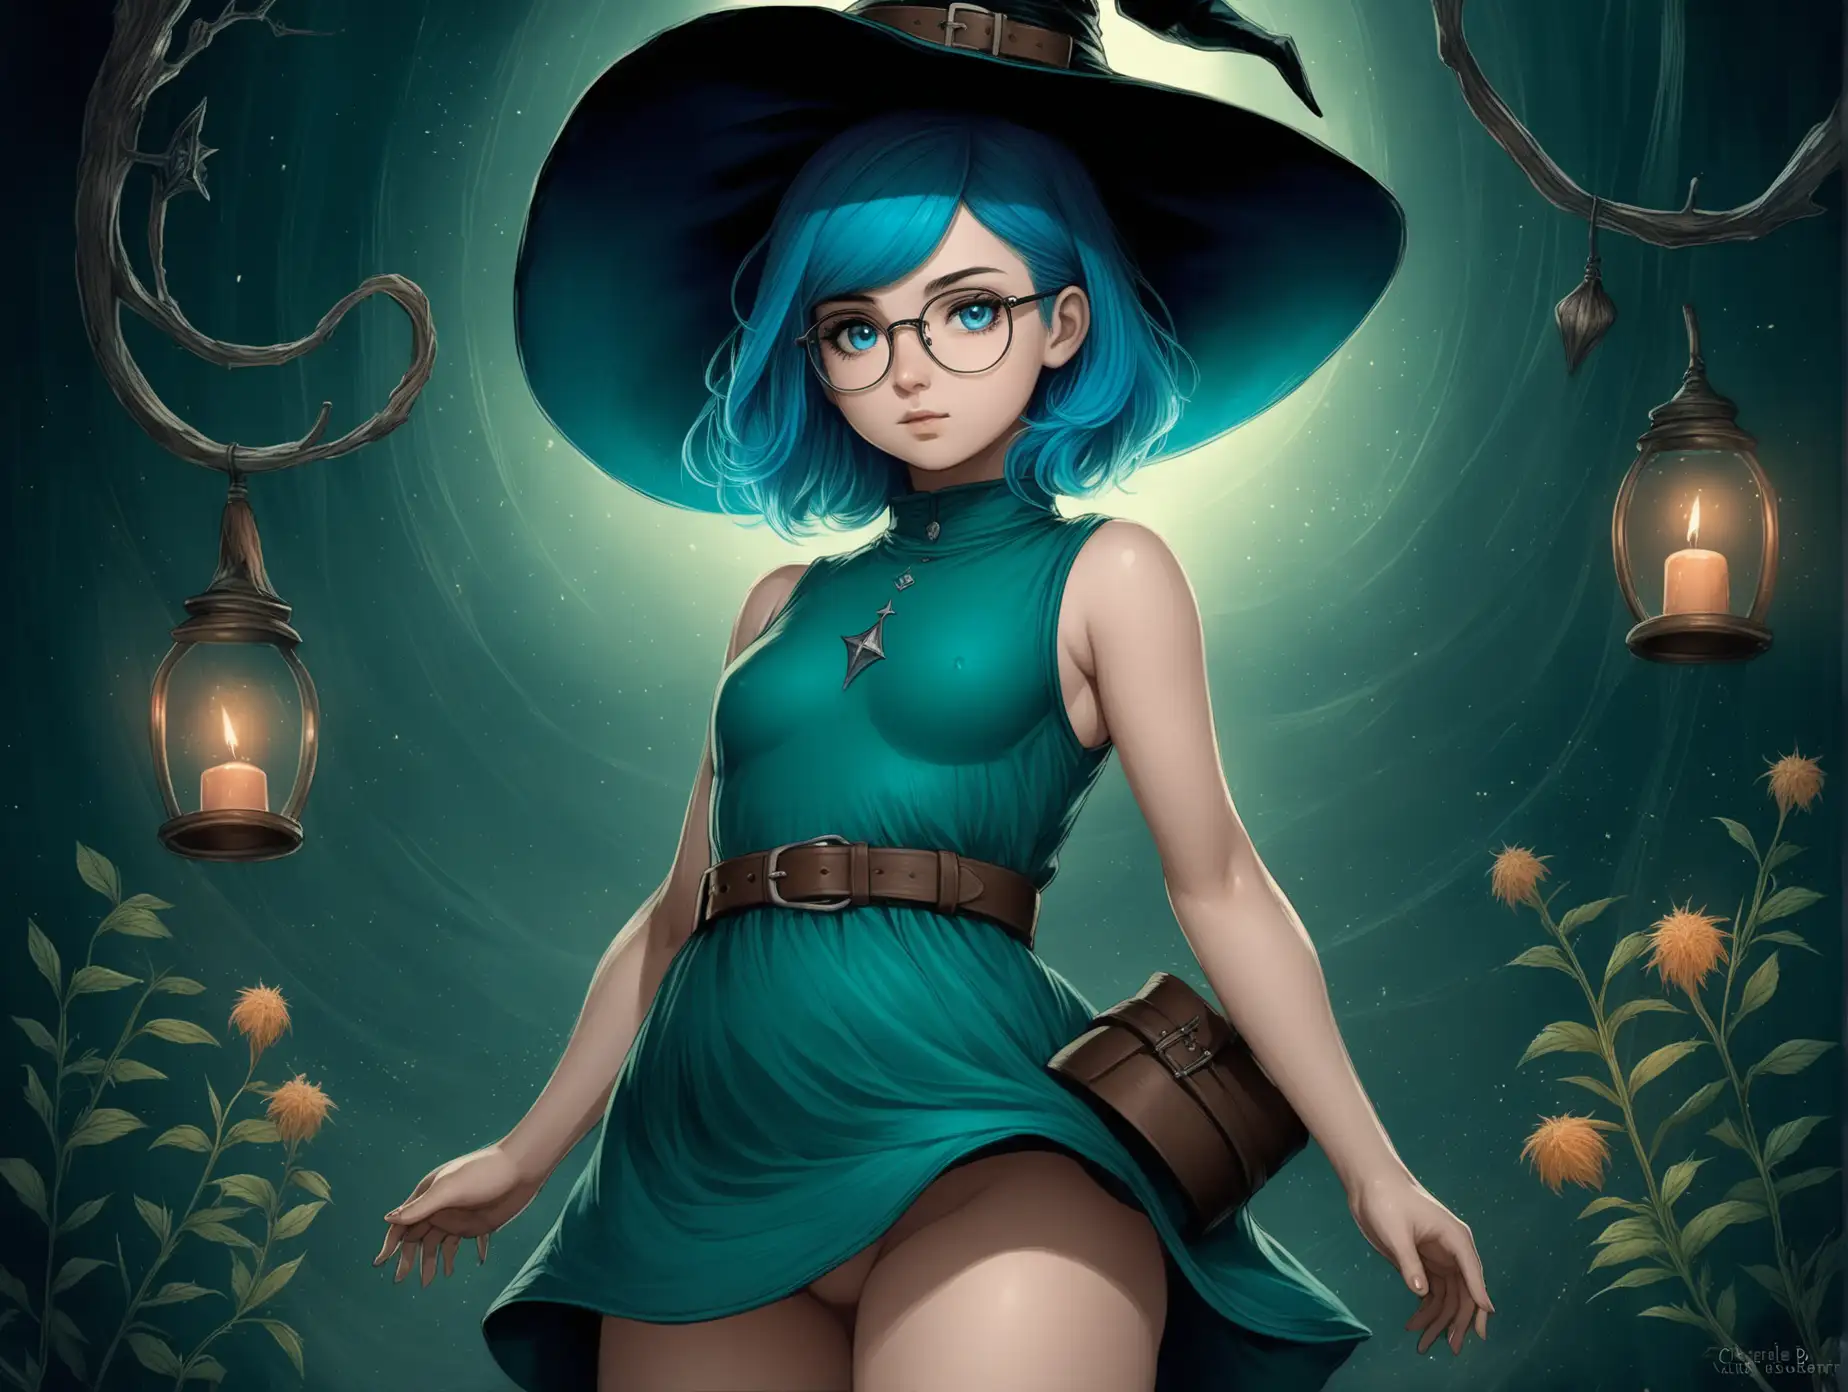 Herbalist-Witch-with-Bright-Blue-Hair-in-Dark-Fantasy-Anime-Style